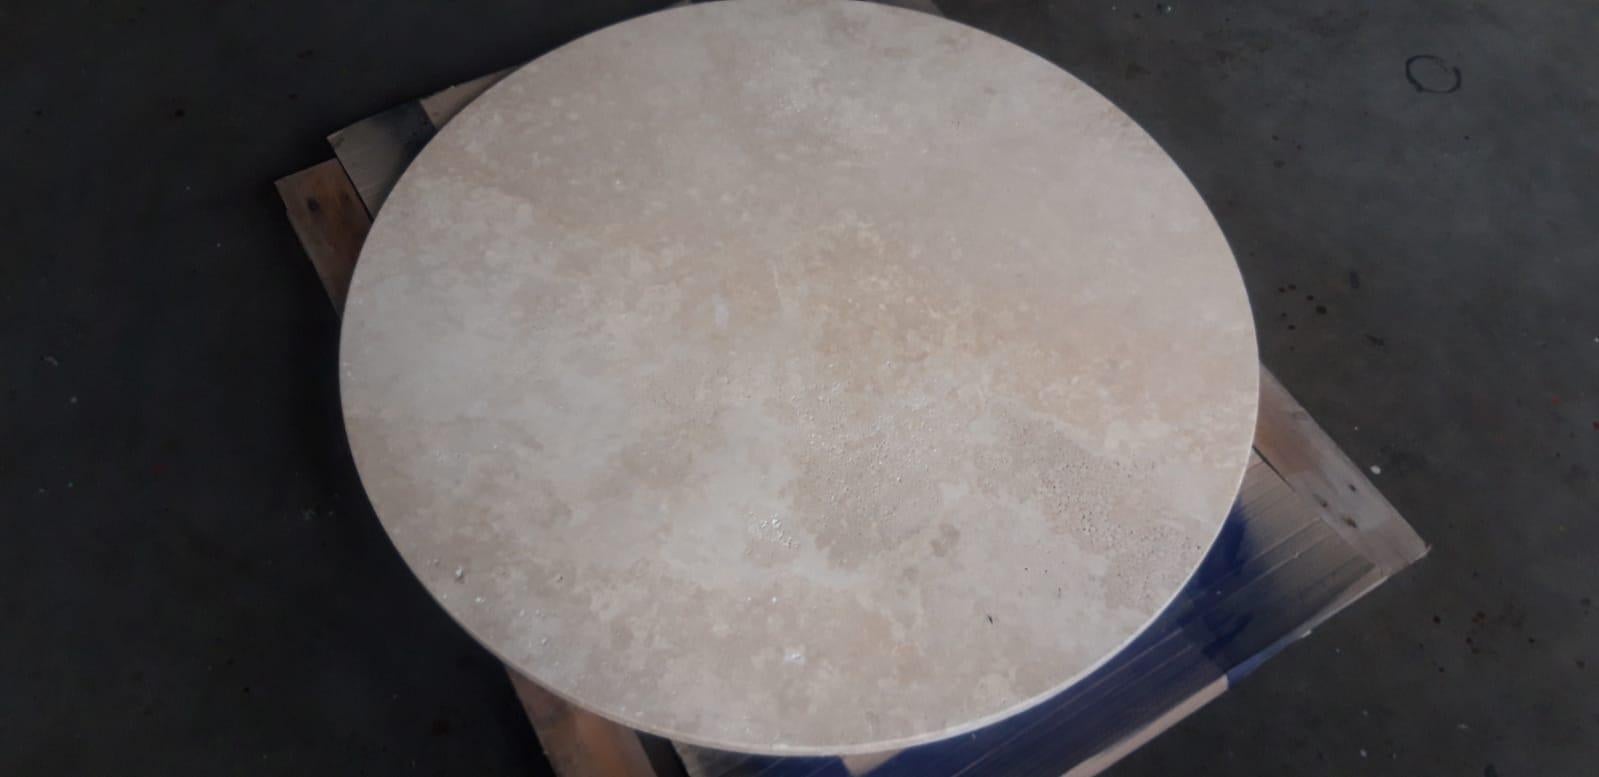 bespoke round dining table